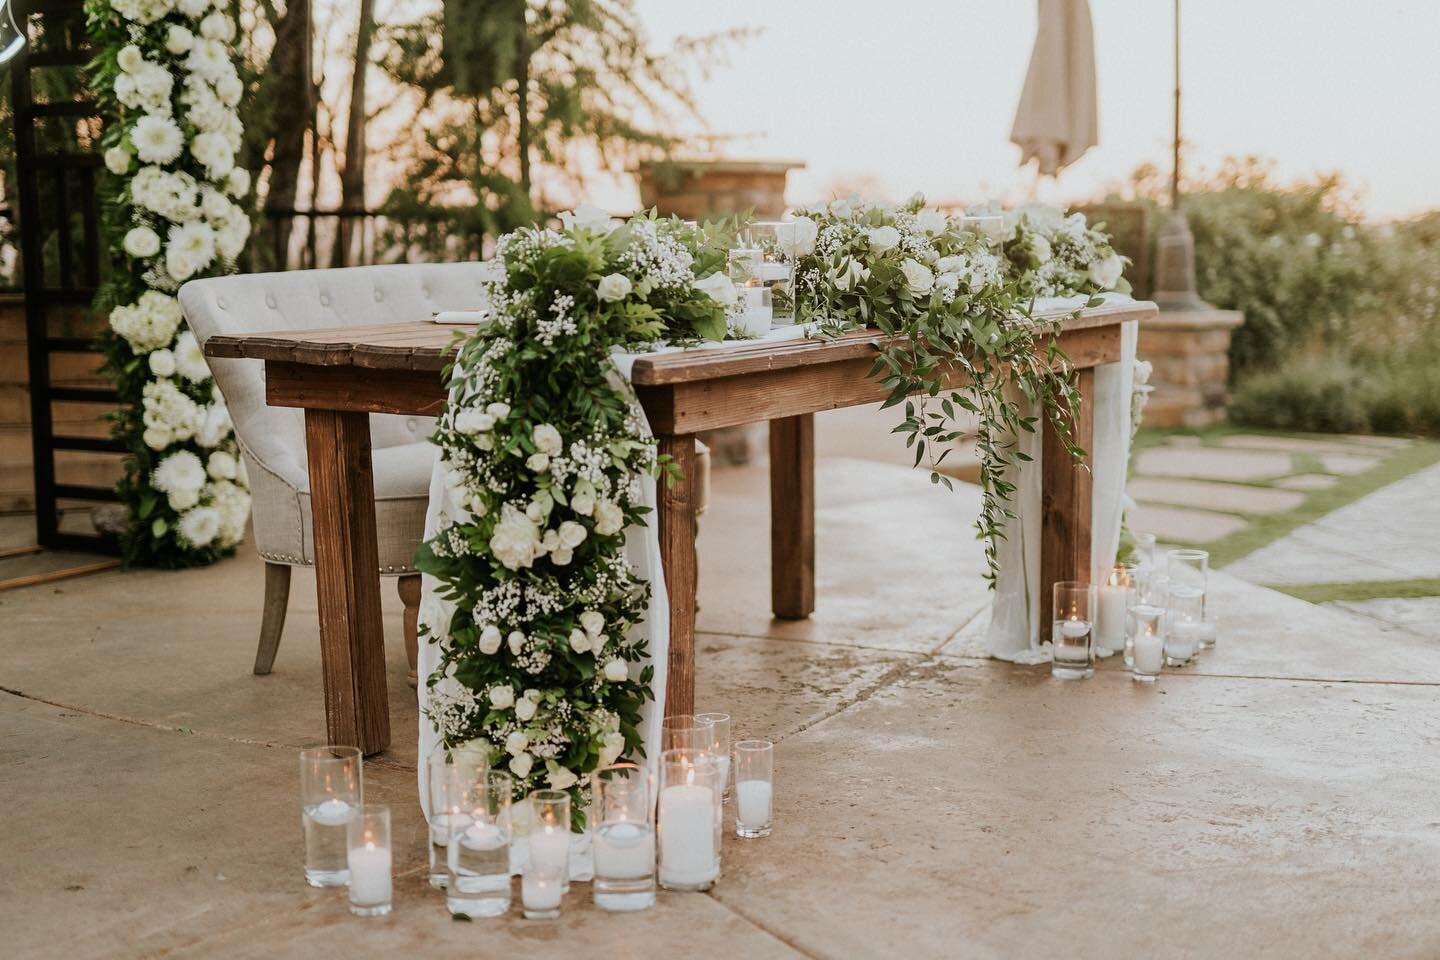 Cascading florals and candles! Yes please! @raynefilms @serendipity_weddings @flowersetcbeaumont